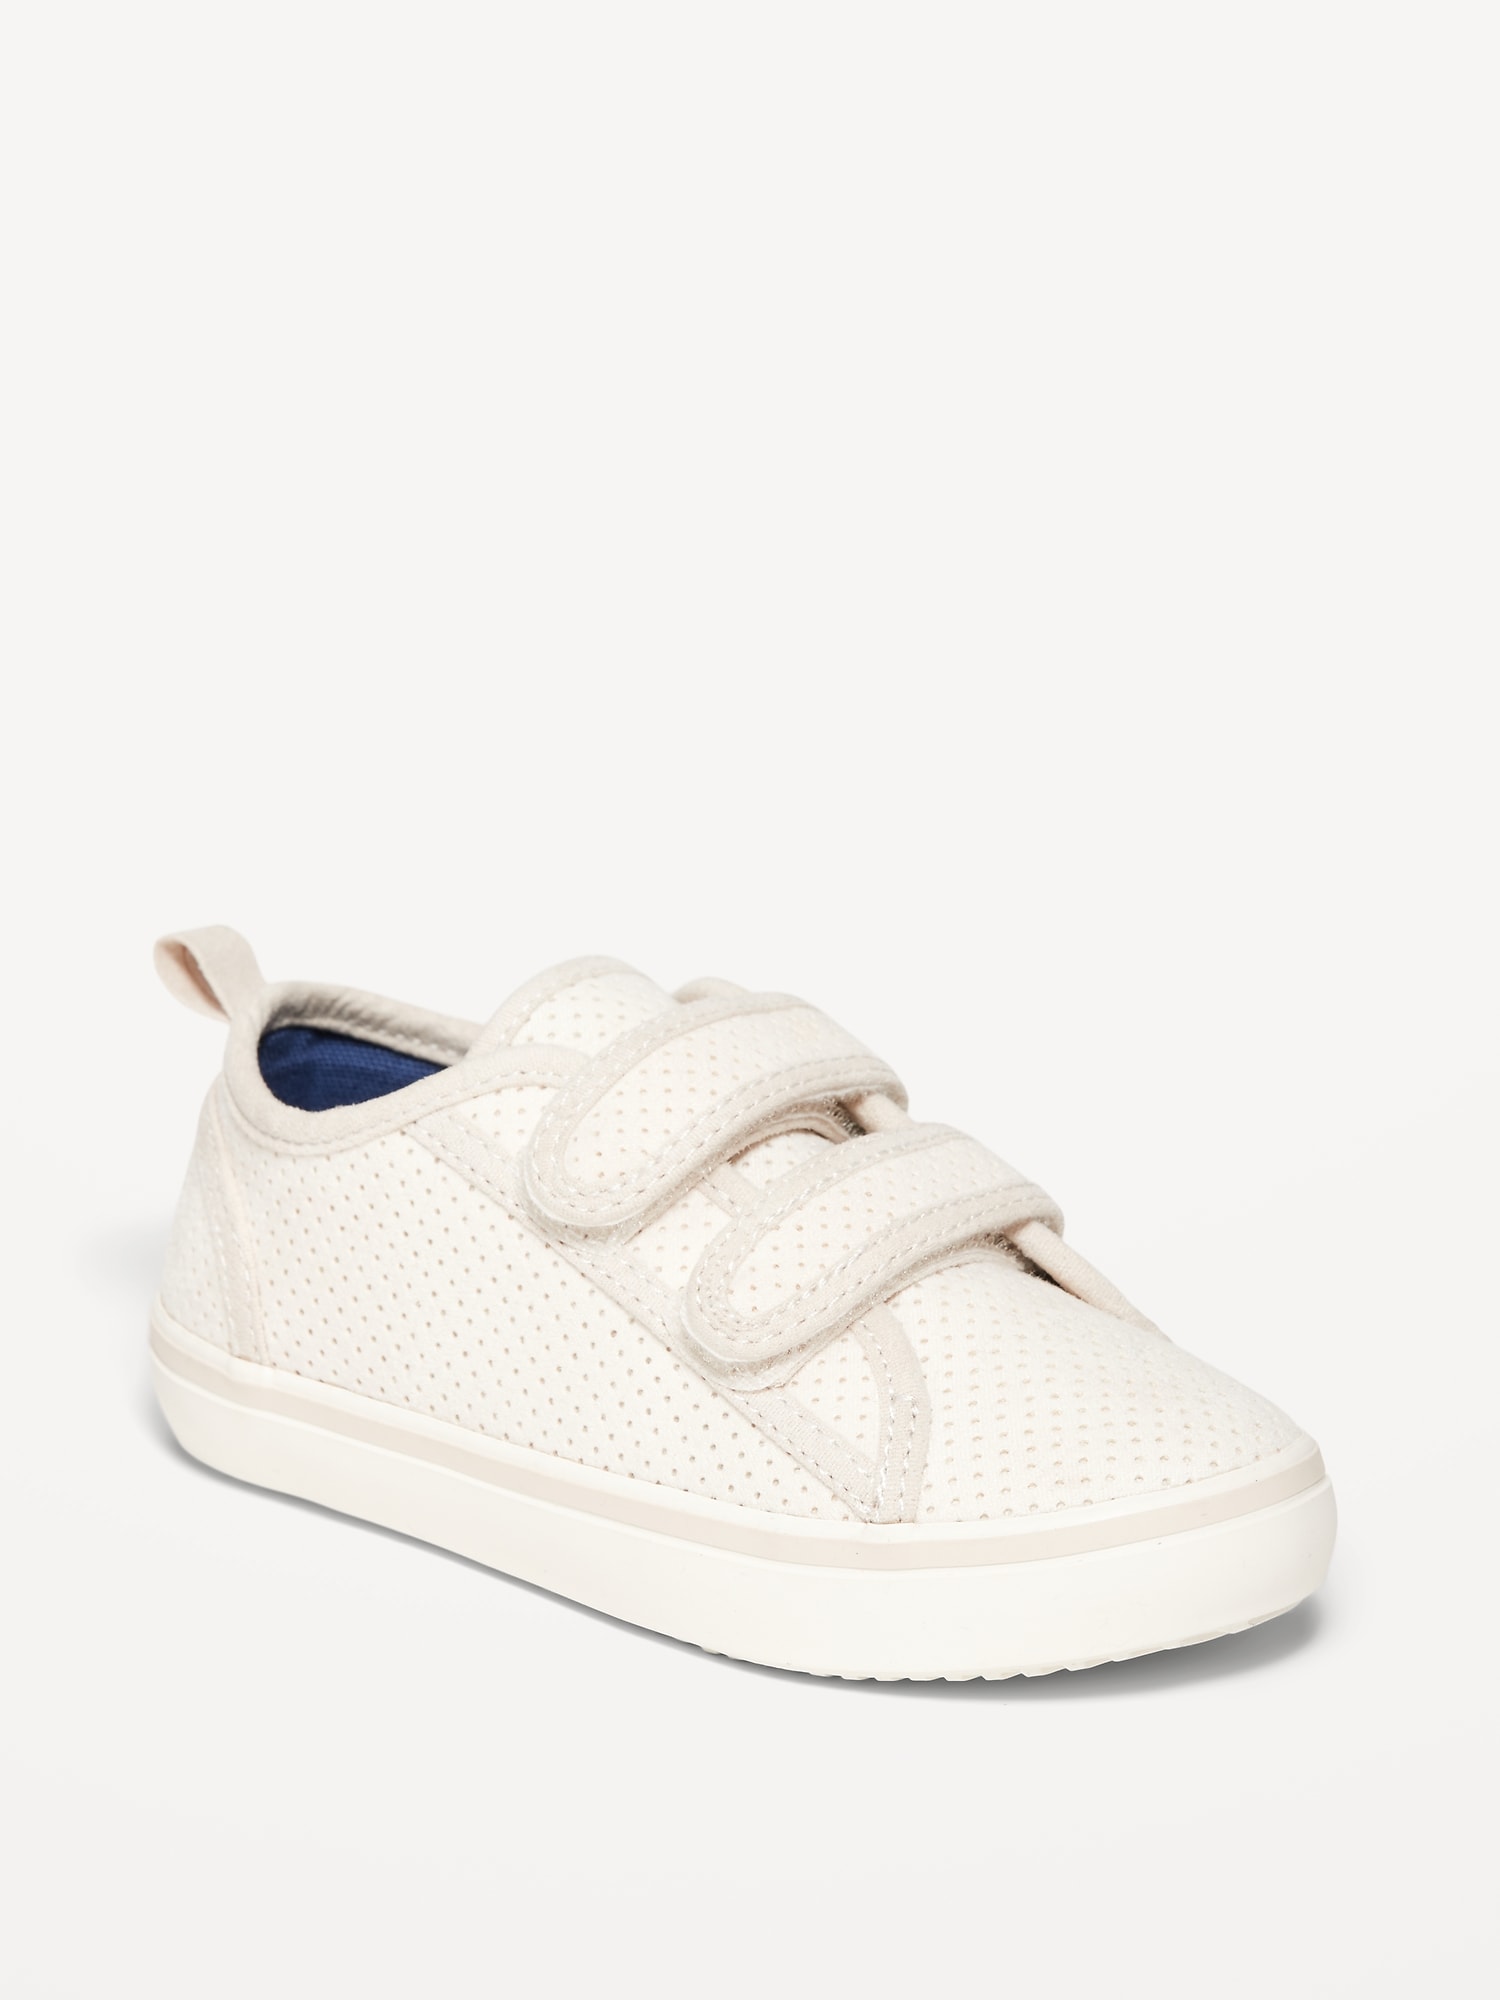 Old Navy Unisex Perforated Faux-Suede Double-Strap Sneakers for Toddler multi. 1